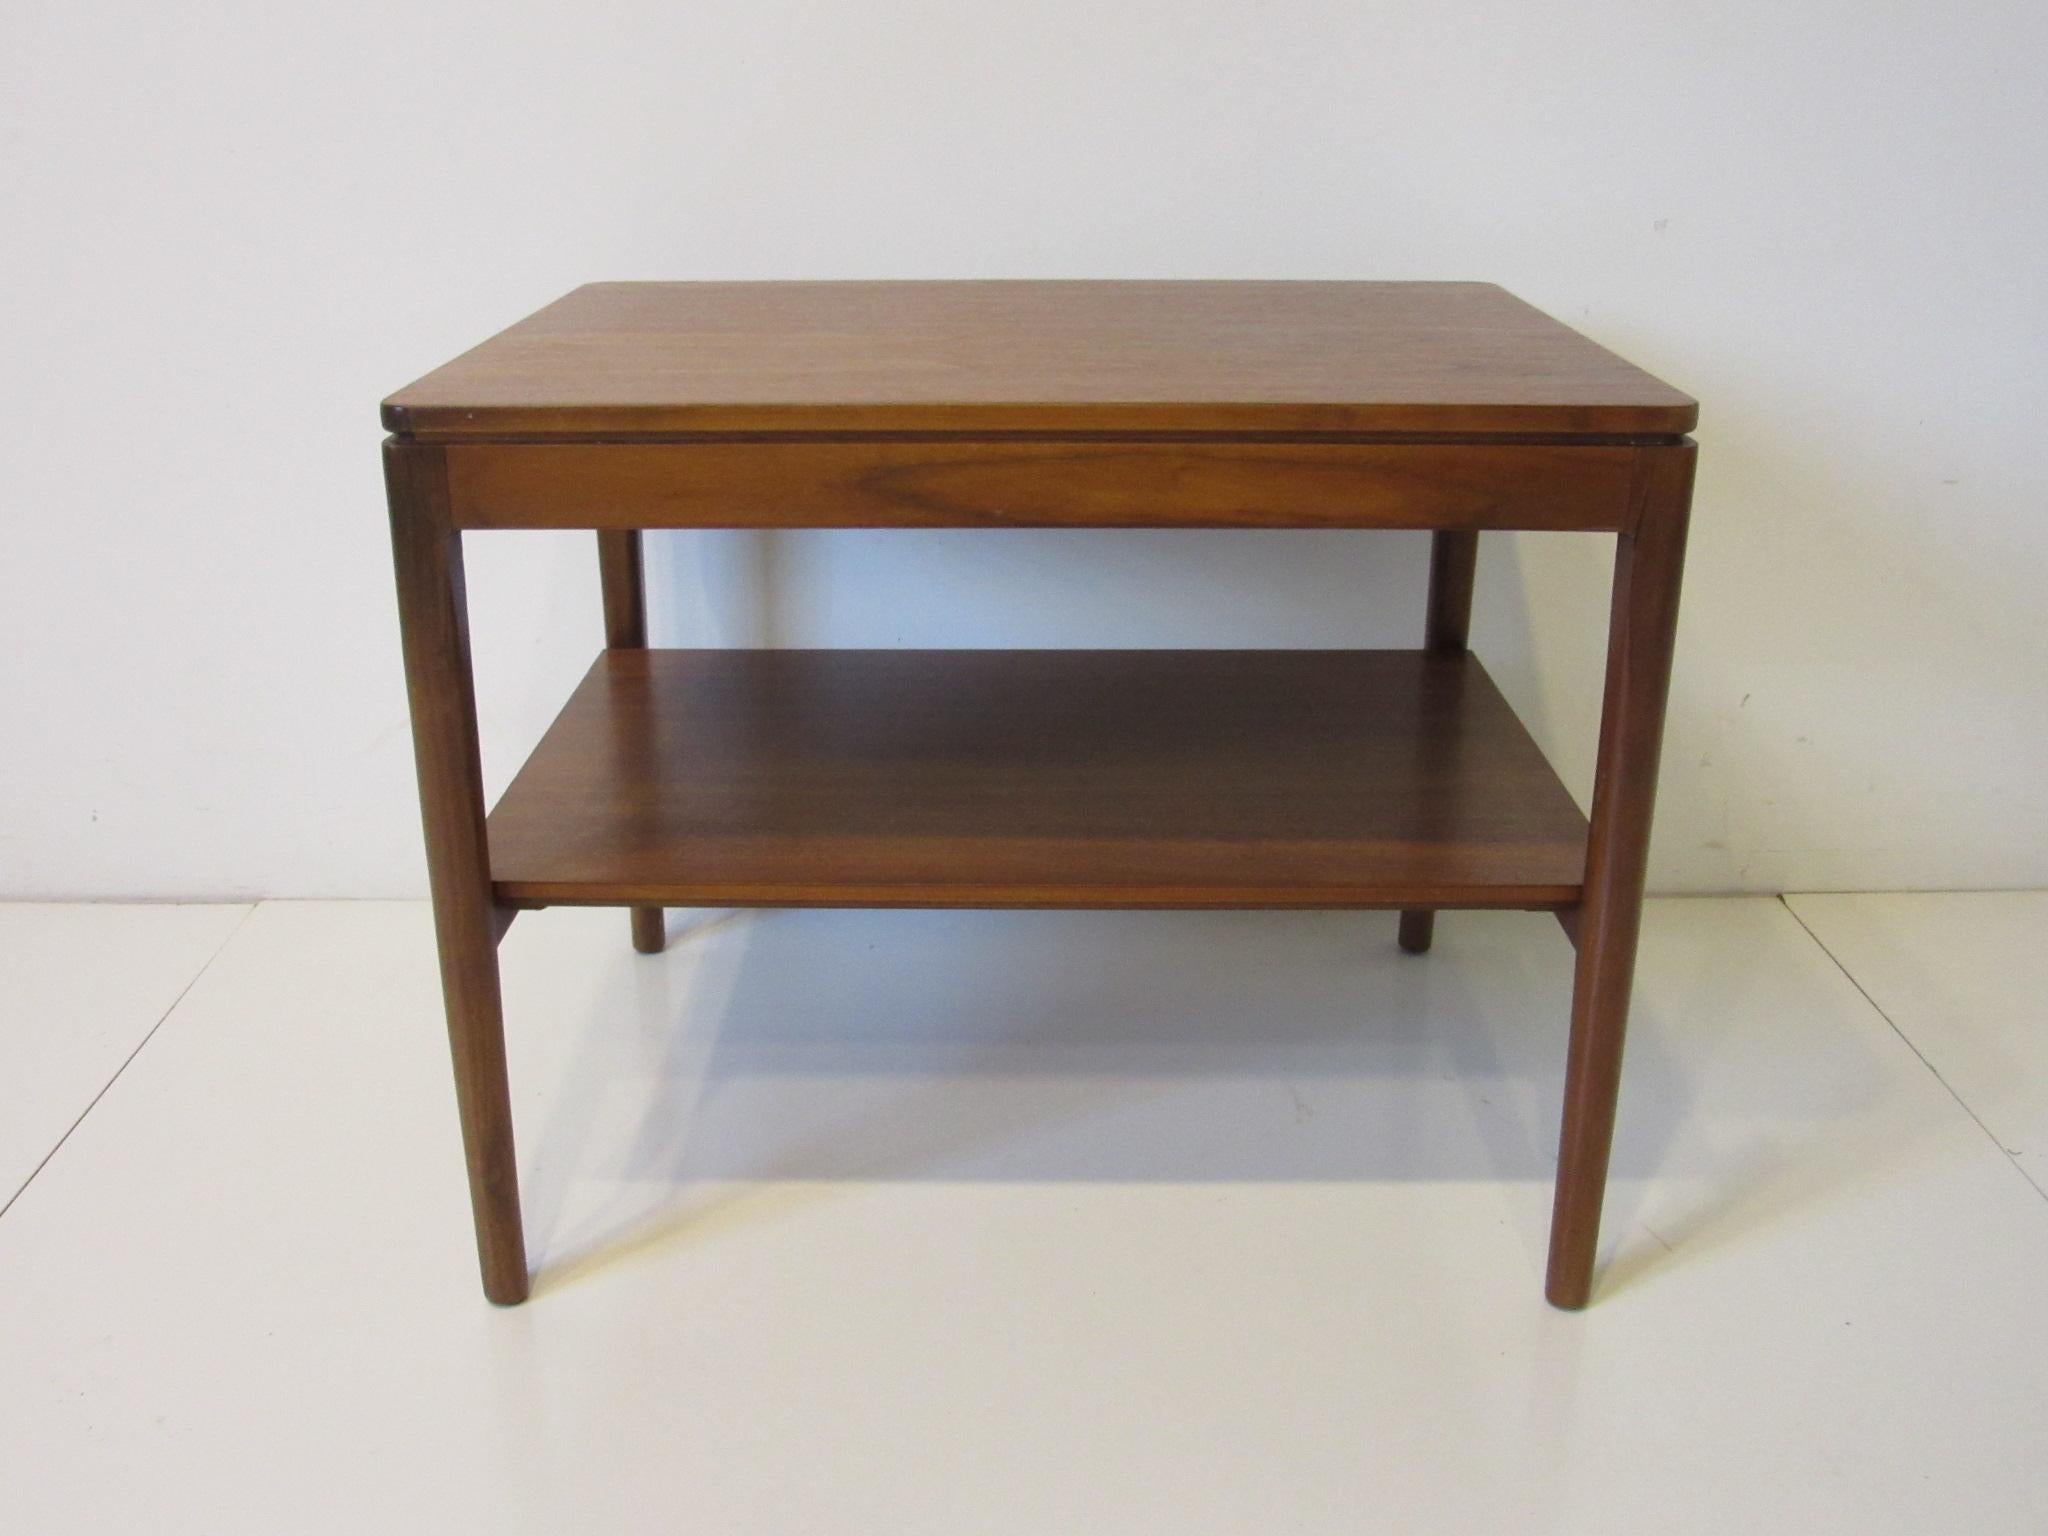 A walnut side table with solid construction designed by Kipp Stewart for Drexel from their Declaration collection, a simple design with rounded edges and fine wood gaining. Retains the manufactures stenciled model and manufactures information.